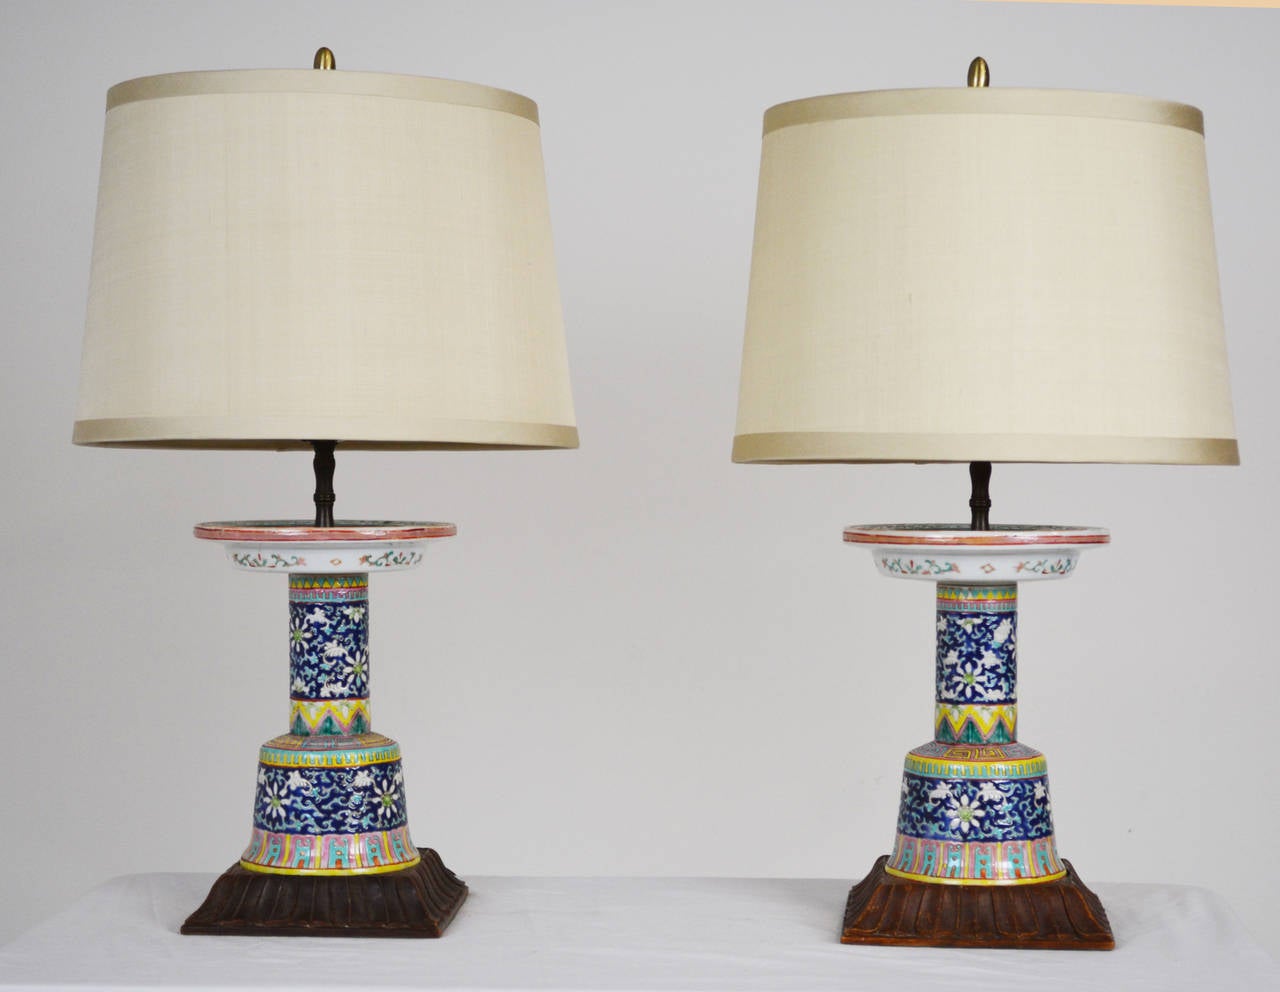 A lovely pair of lamps made from Chinese porcelain candlesticks on carved wooden bases. Shades not included, for display only.